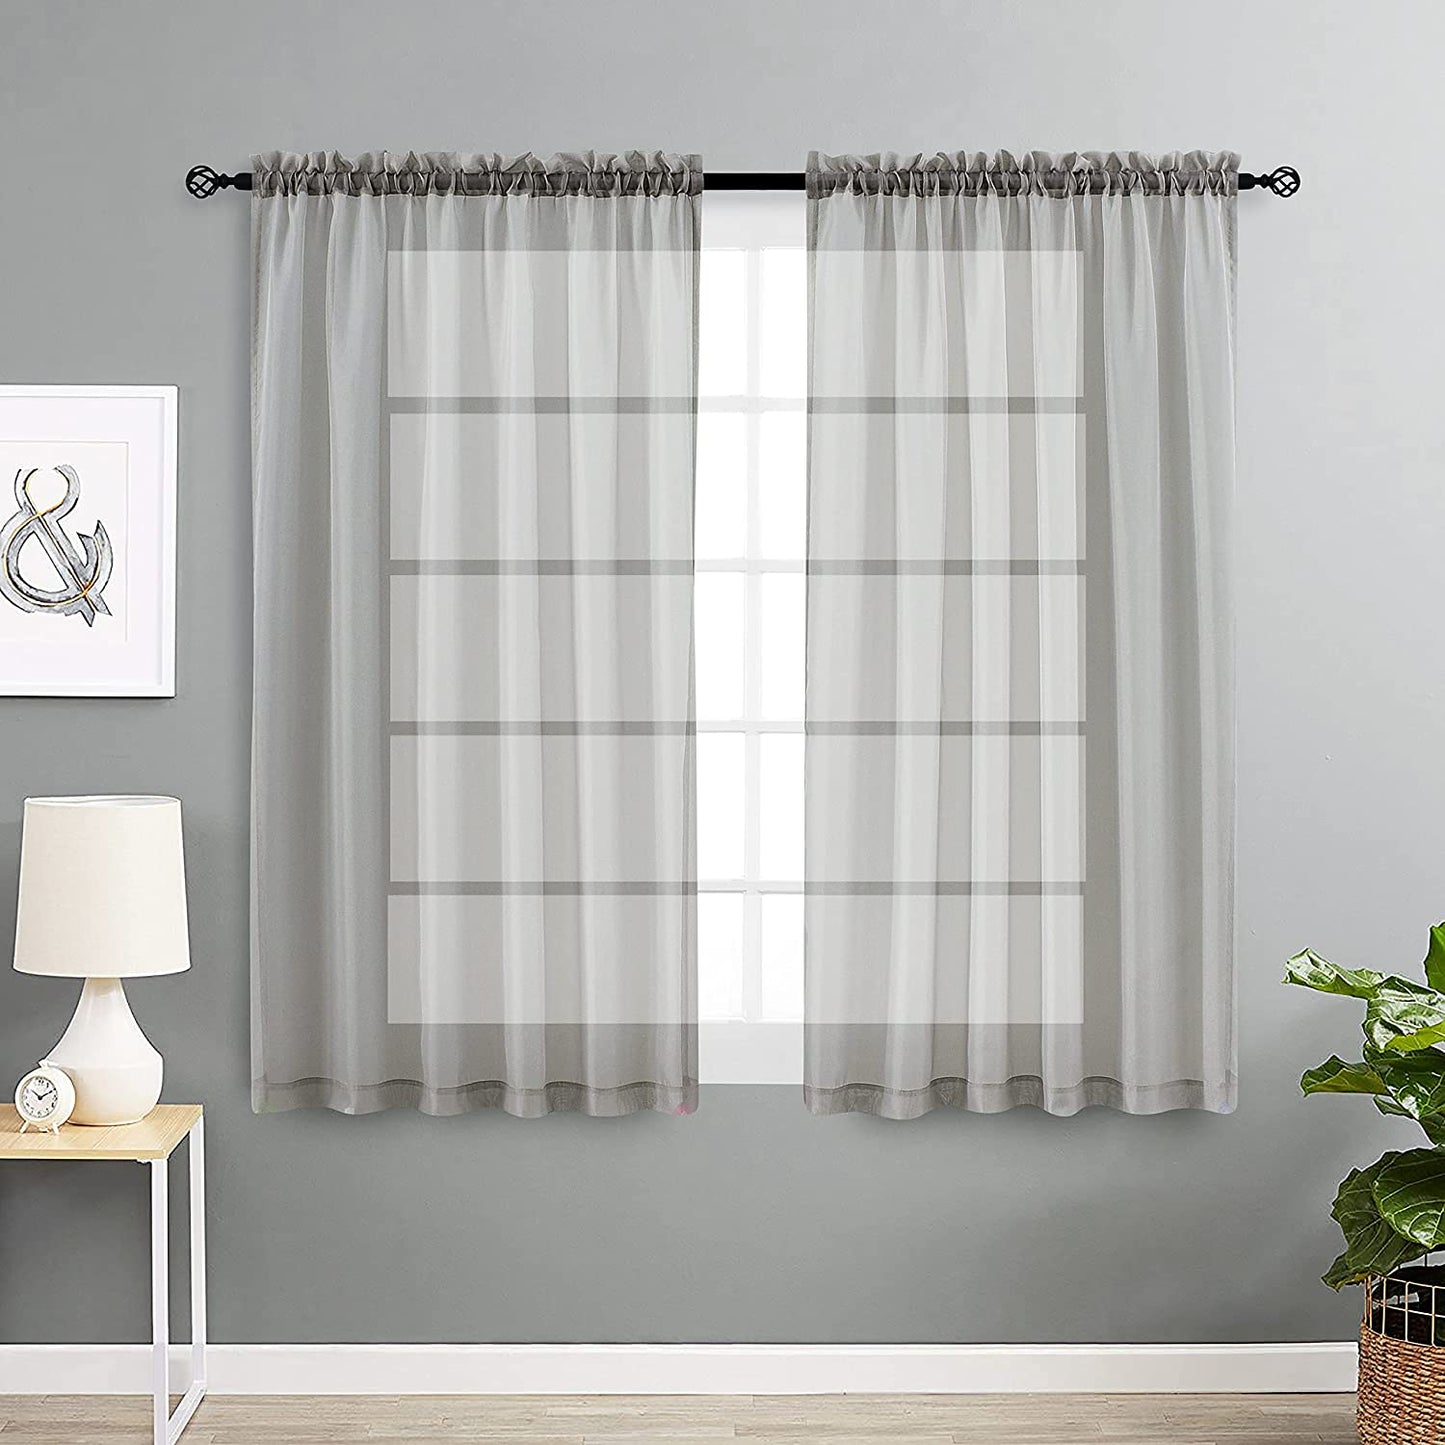 Goodgram 2 Pack: Basic Rod Pocket Sheer Voile Window Curtain Panels - Assorted Colors (White, 84 In. Long)  Goodgram Grey Contemporary 45 In. Long